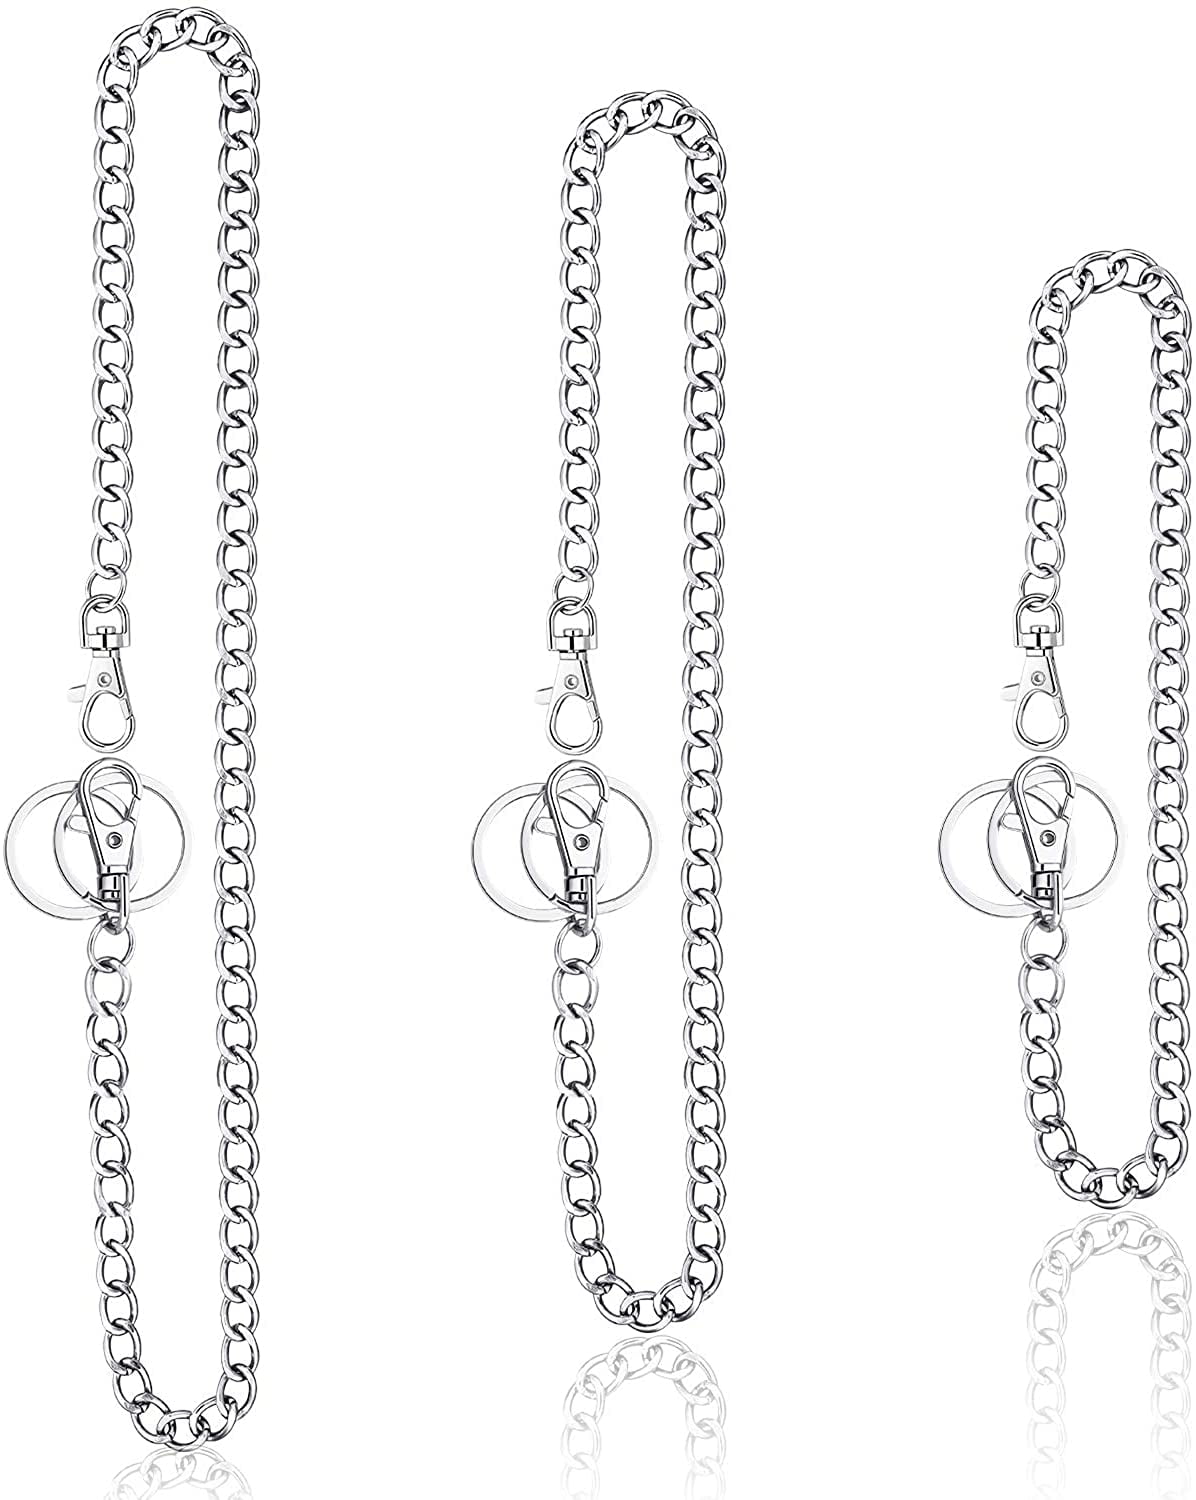 3 Pieces Pants Chain Pocket Chain Belt Metal Jeans Chain Wallet Chain with Lobst